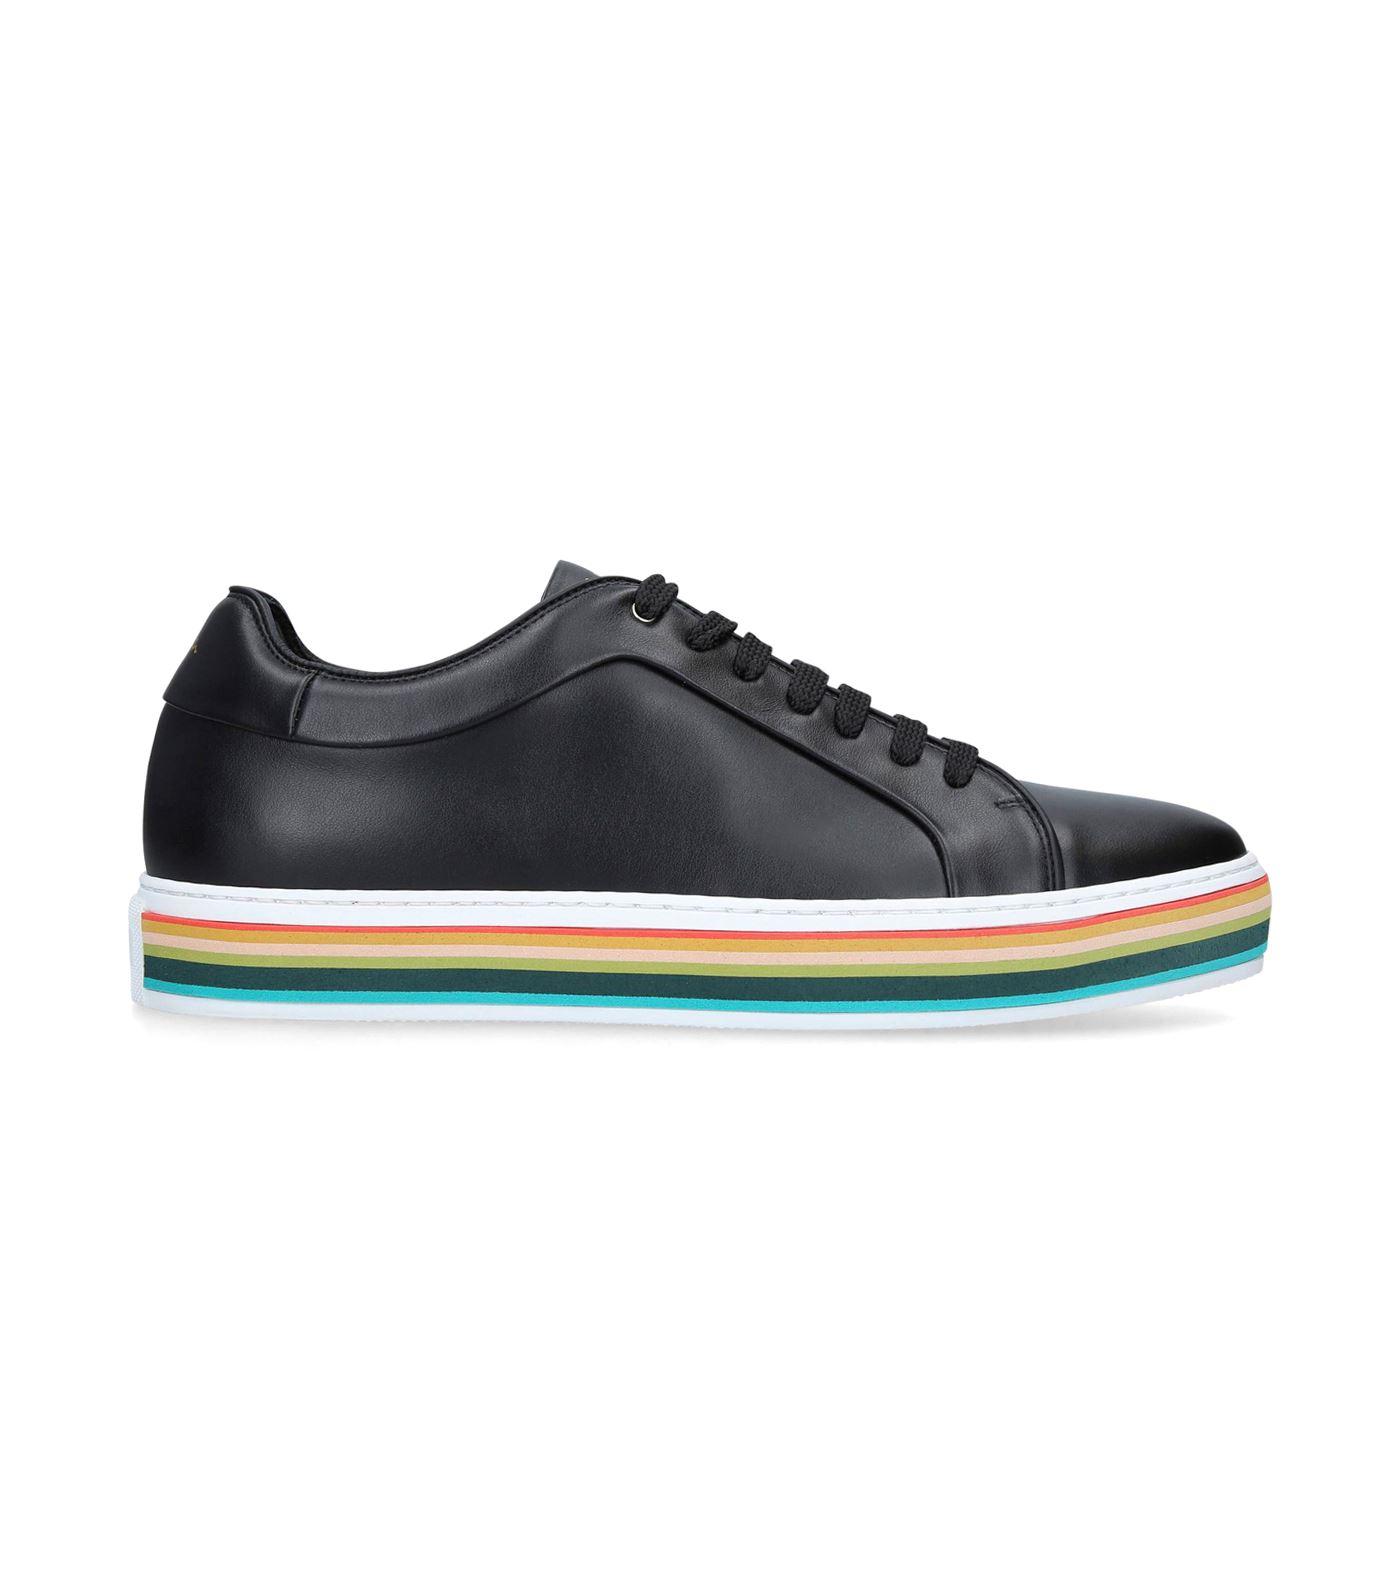 Paul Smith Leather Stripe Basso Sneakers for Men - Lyst